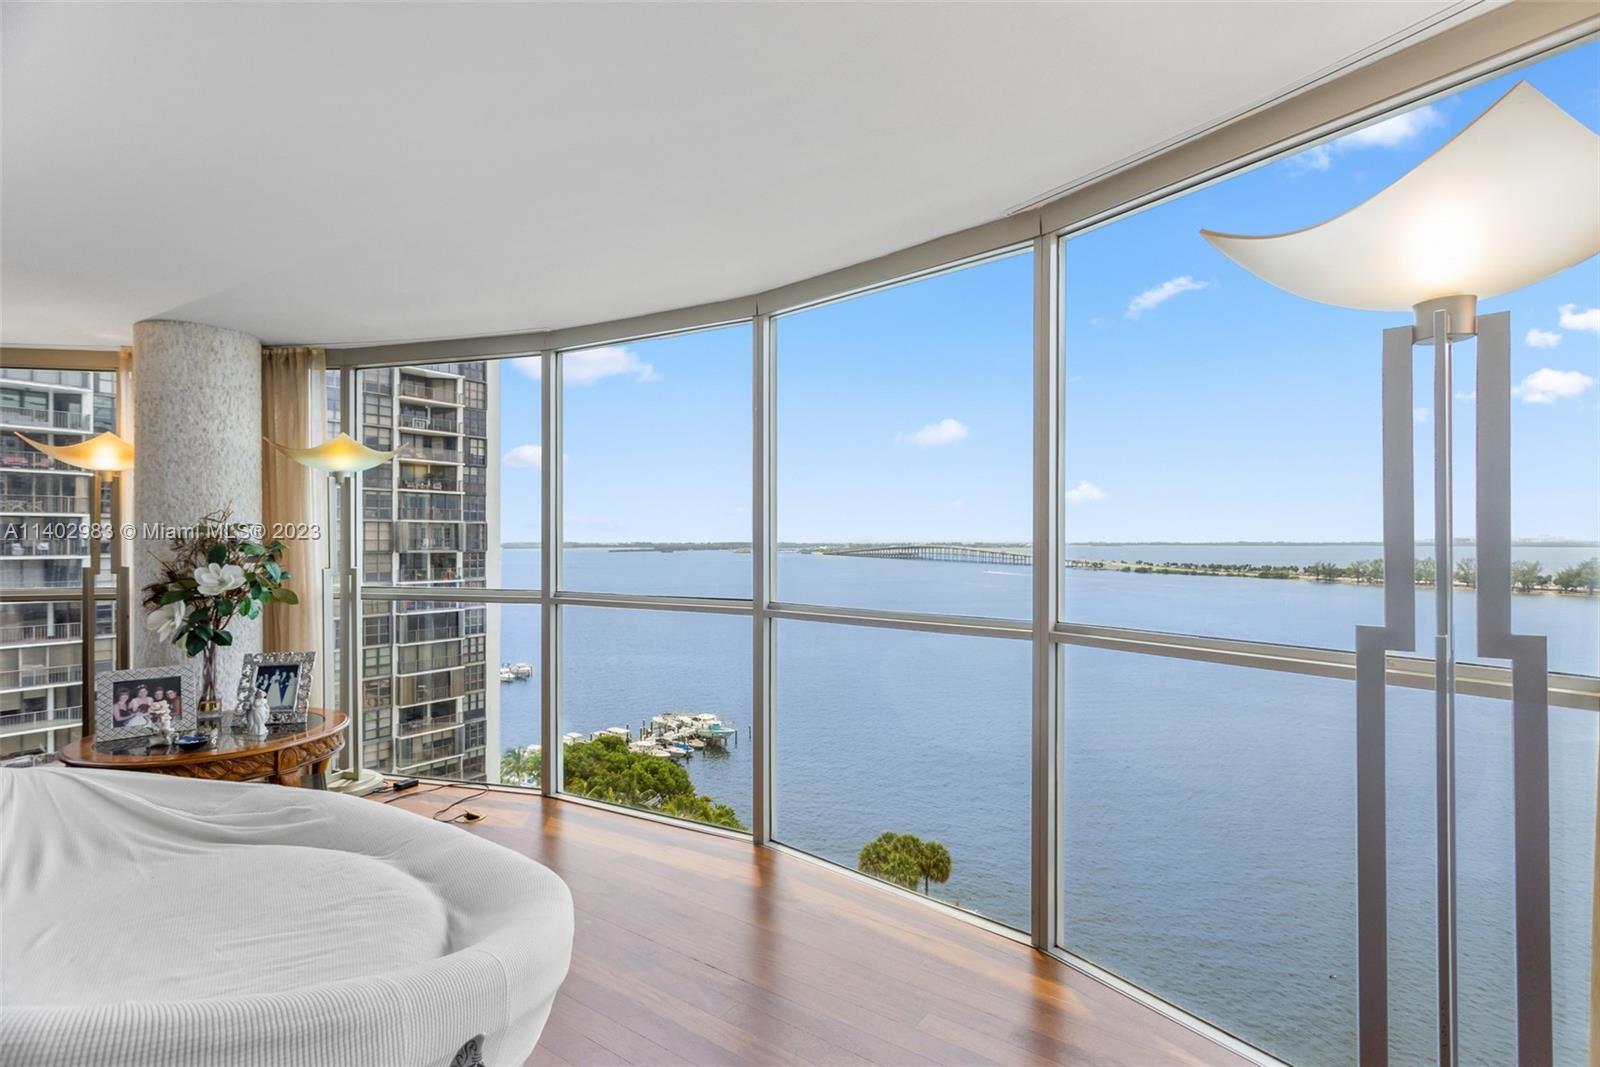 Prepare to be mesmerized by breathtaking 180-degree unobstructed views of Biscayne Bay, visible thro